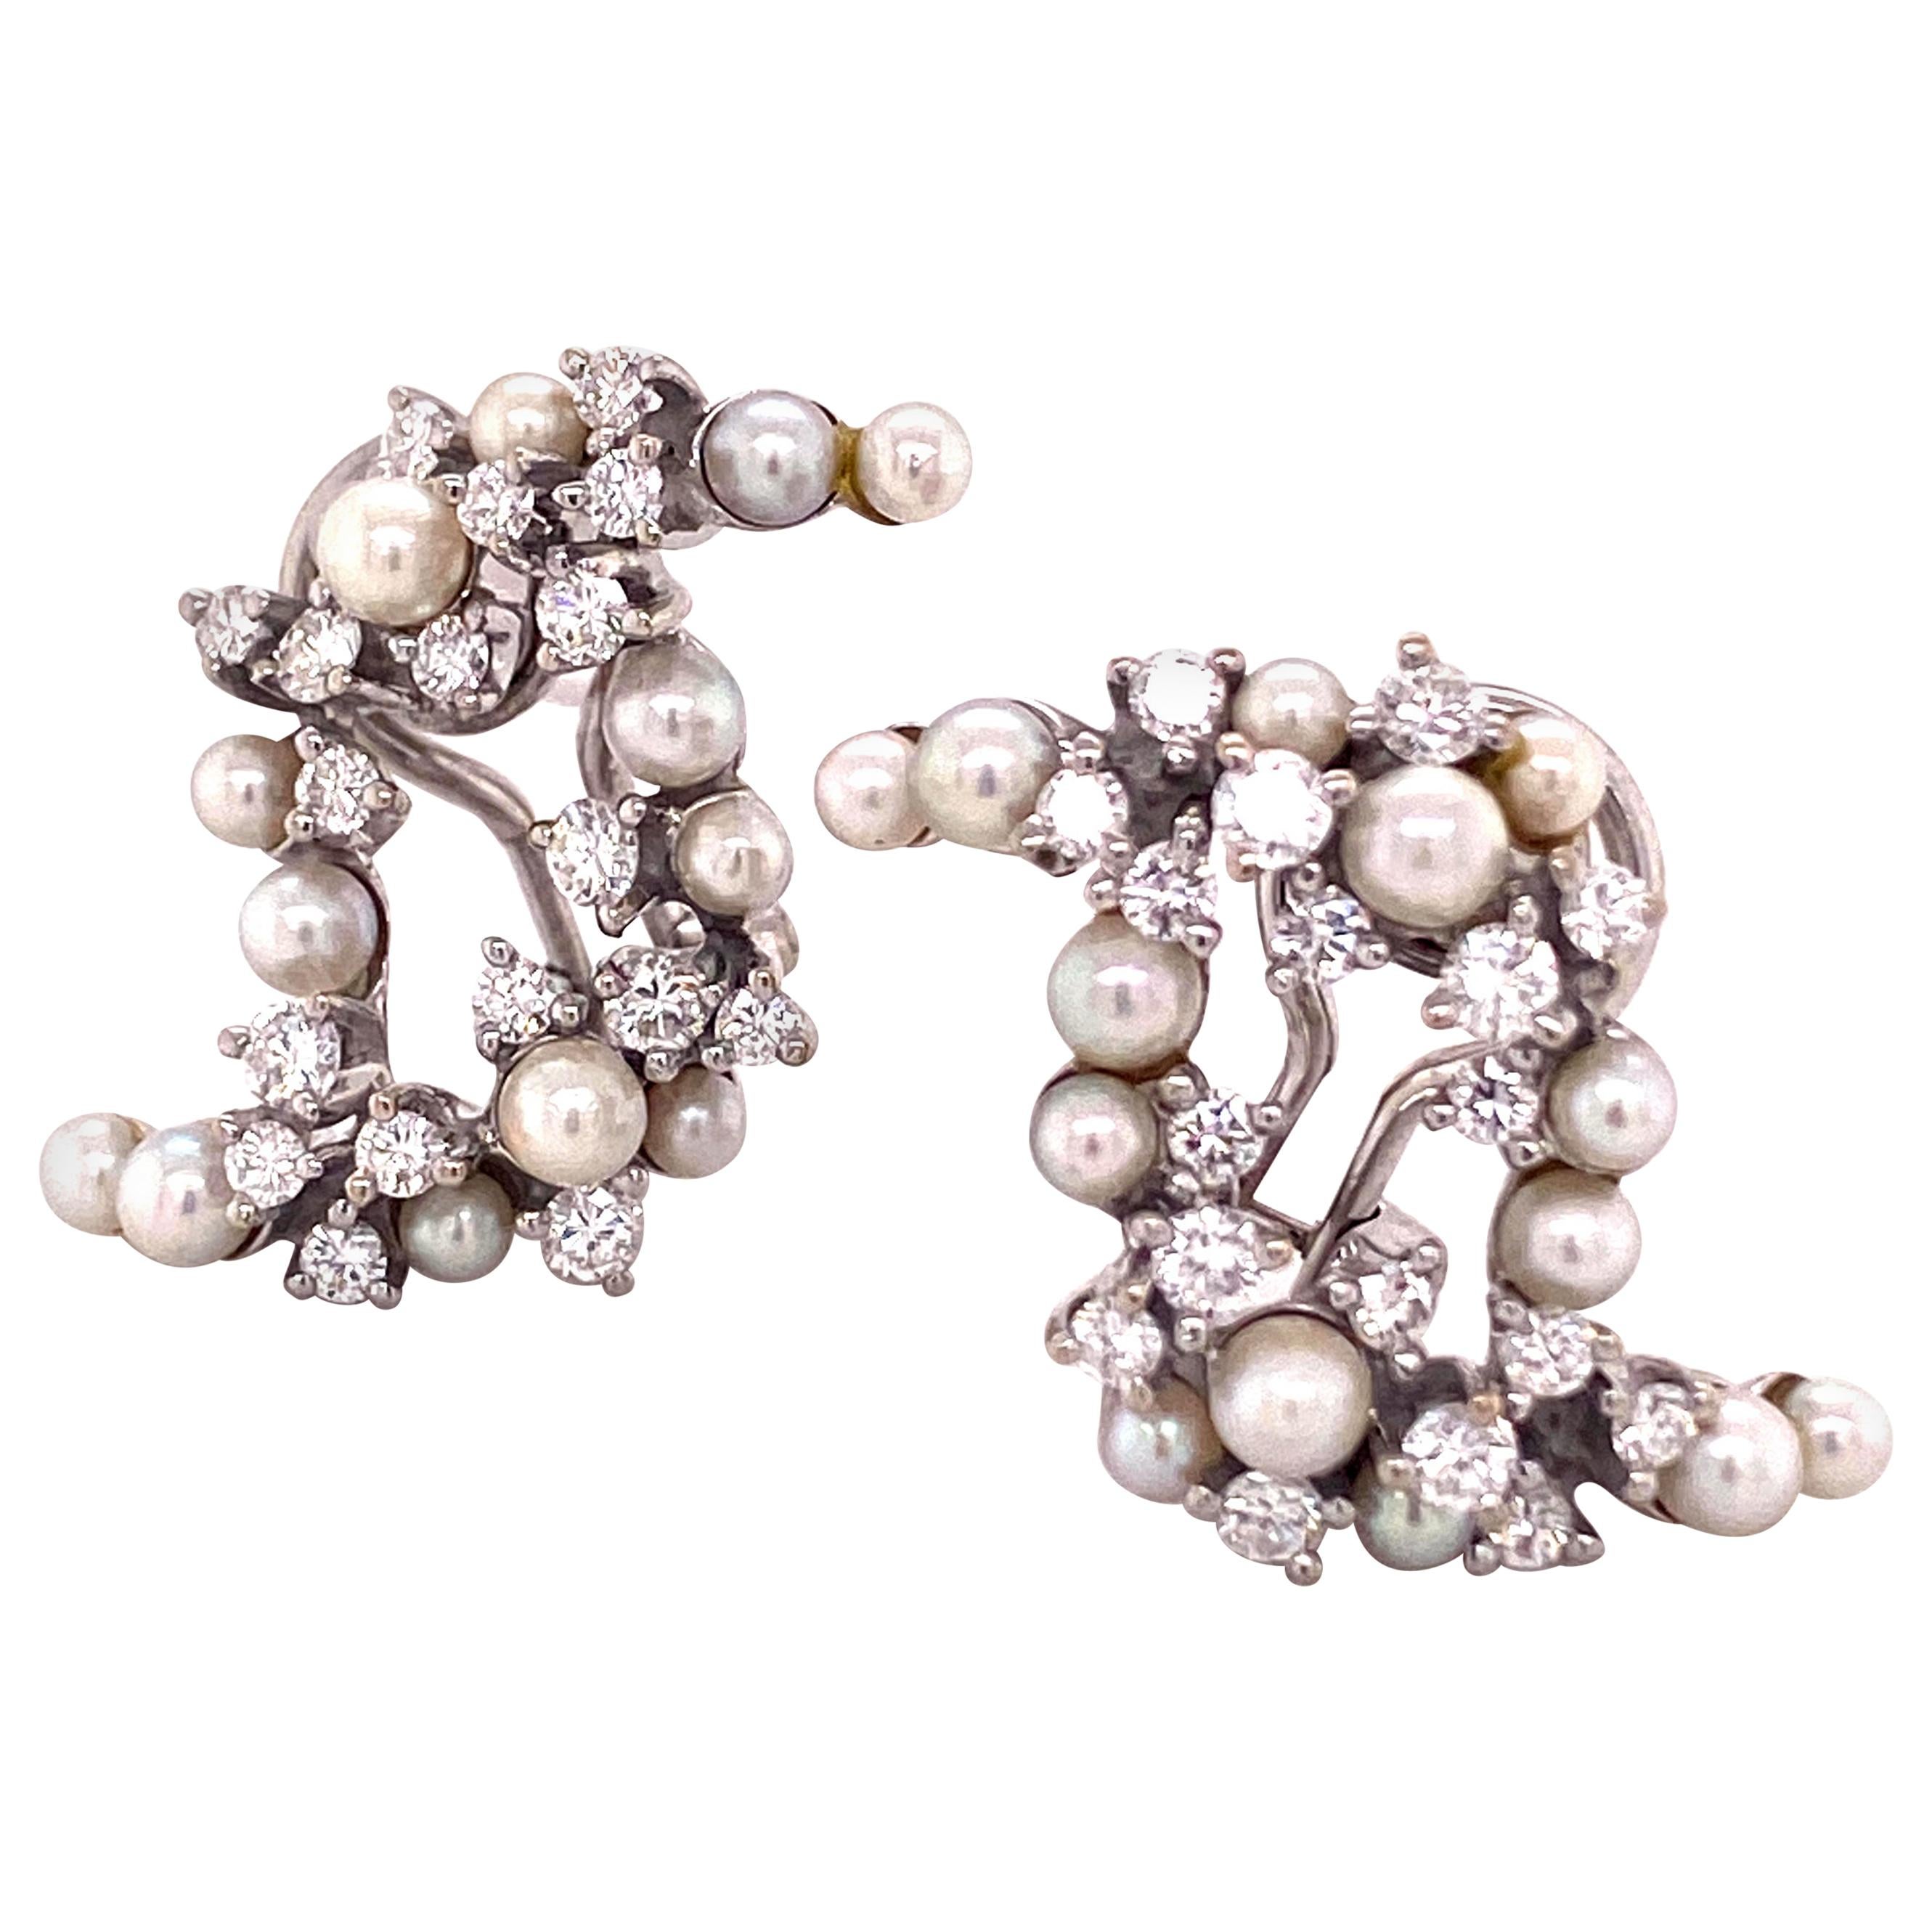 Diamond and Cultured Pearl Earrings in White Gold 750